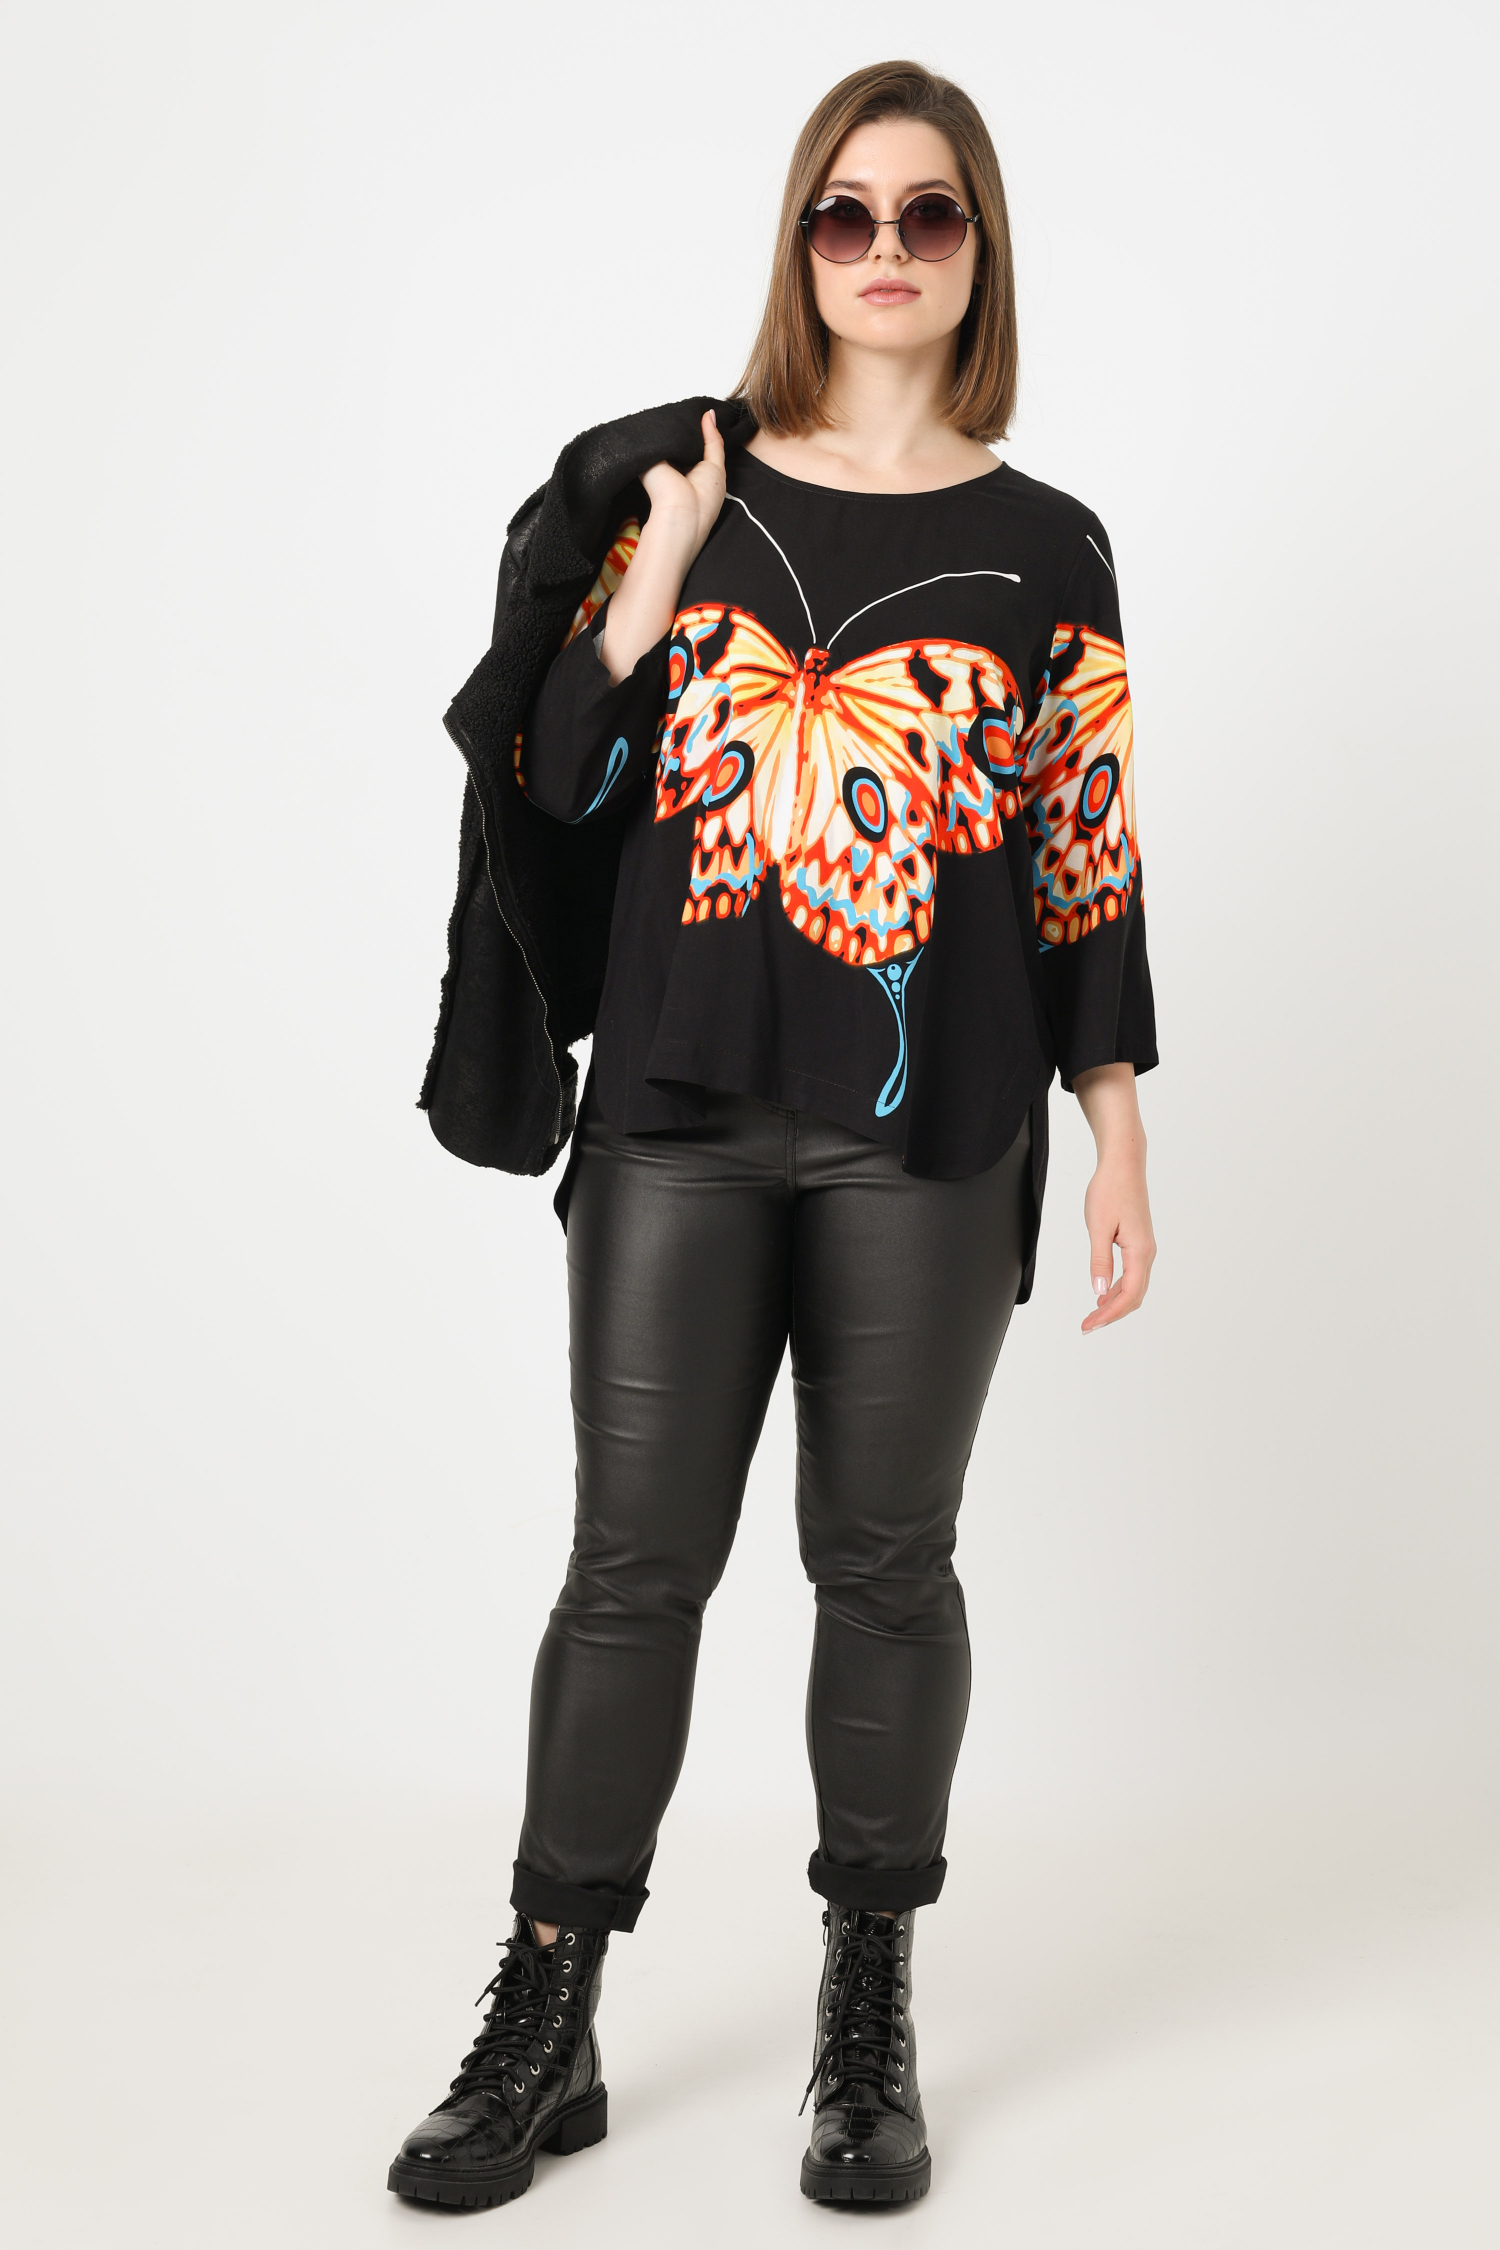 Butterfly design blouse